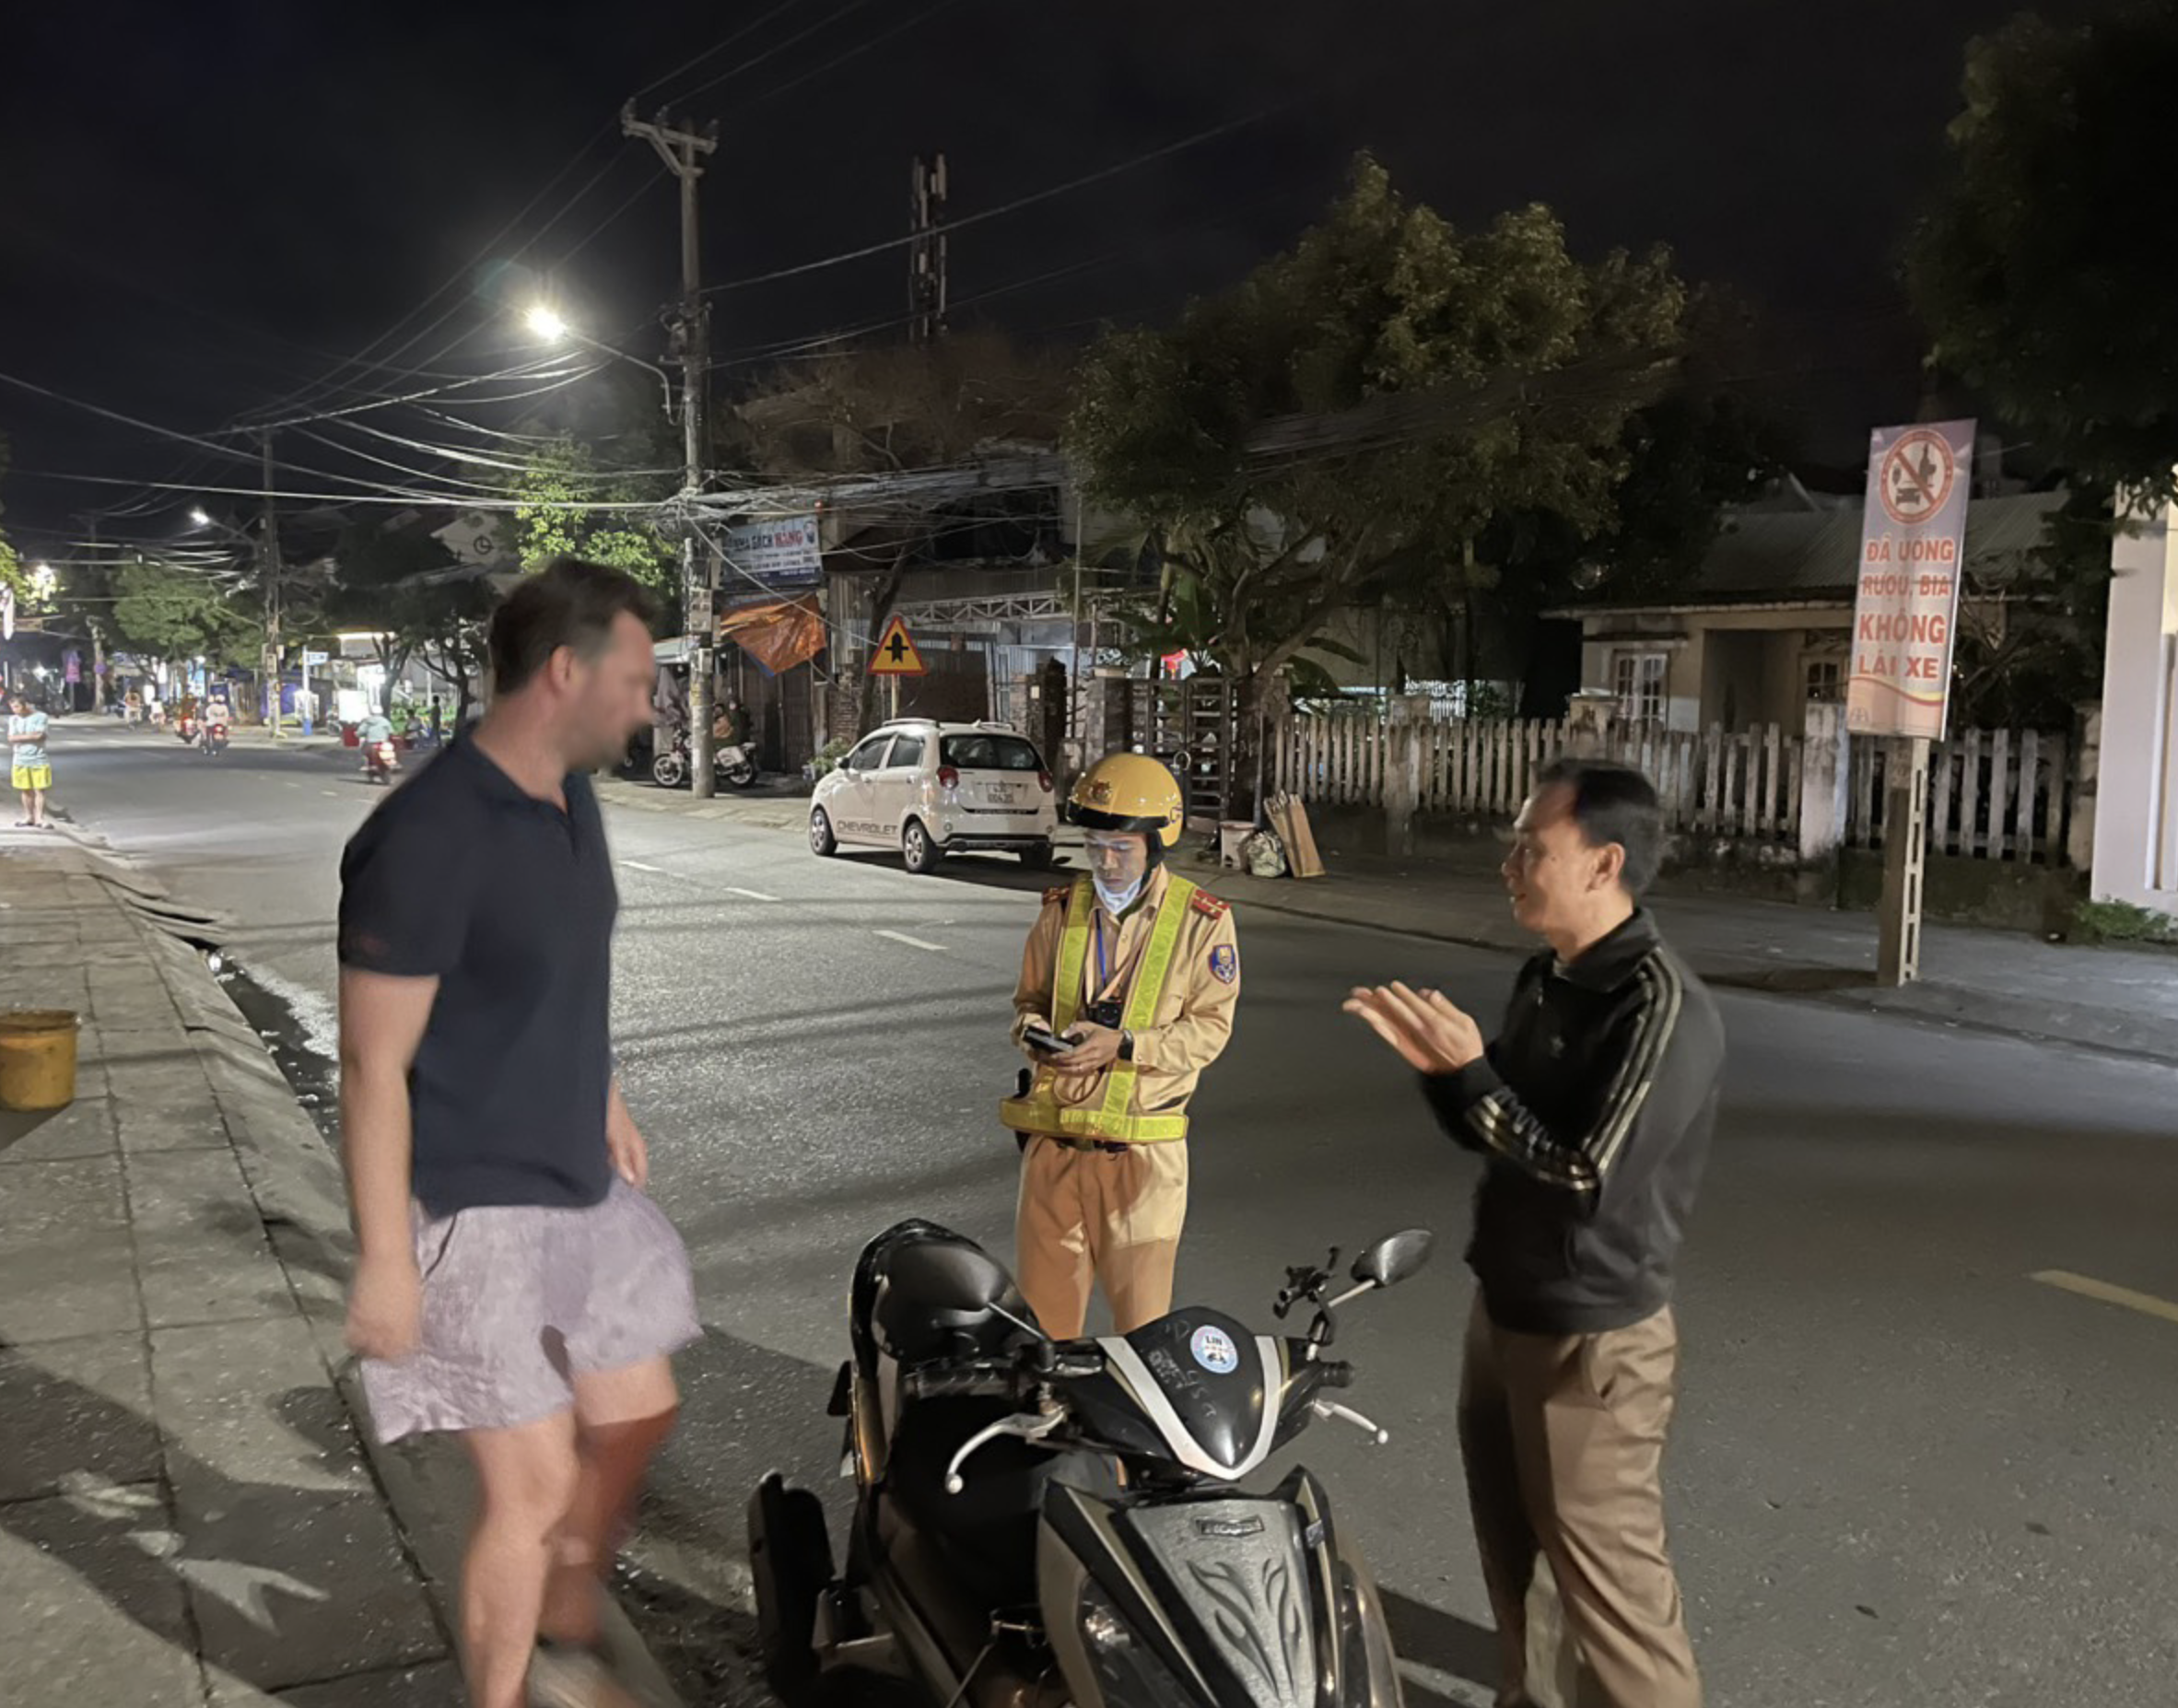 Foreigners sanctioned for traffic safety violations in Vietnam’s Hoi An